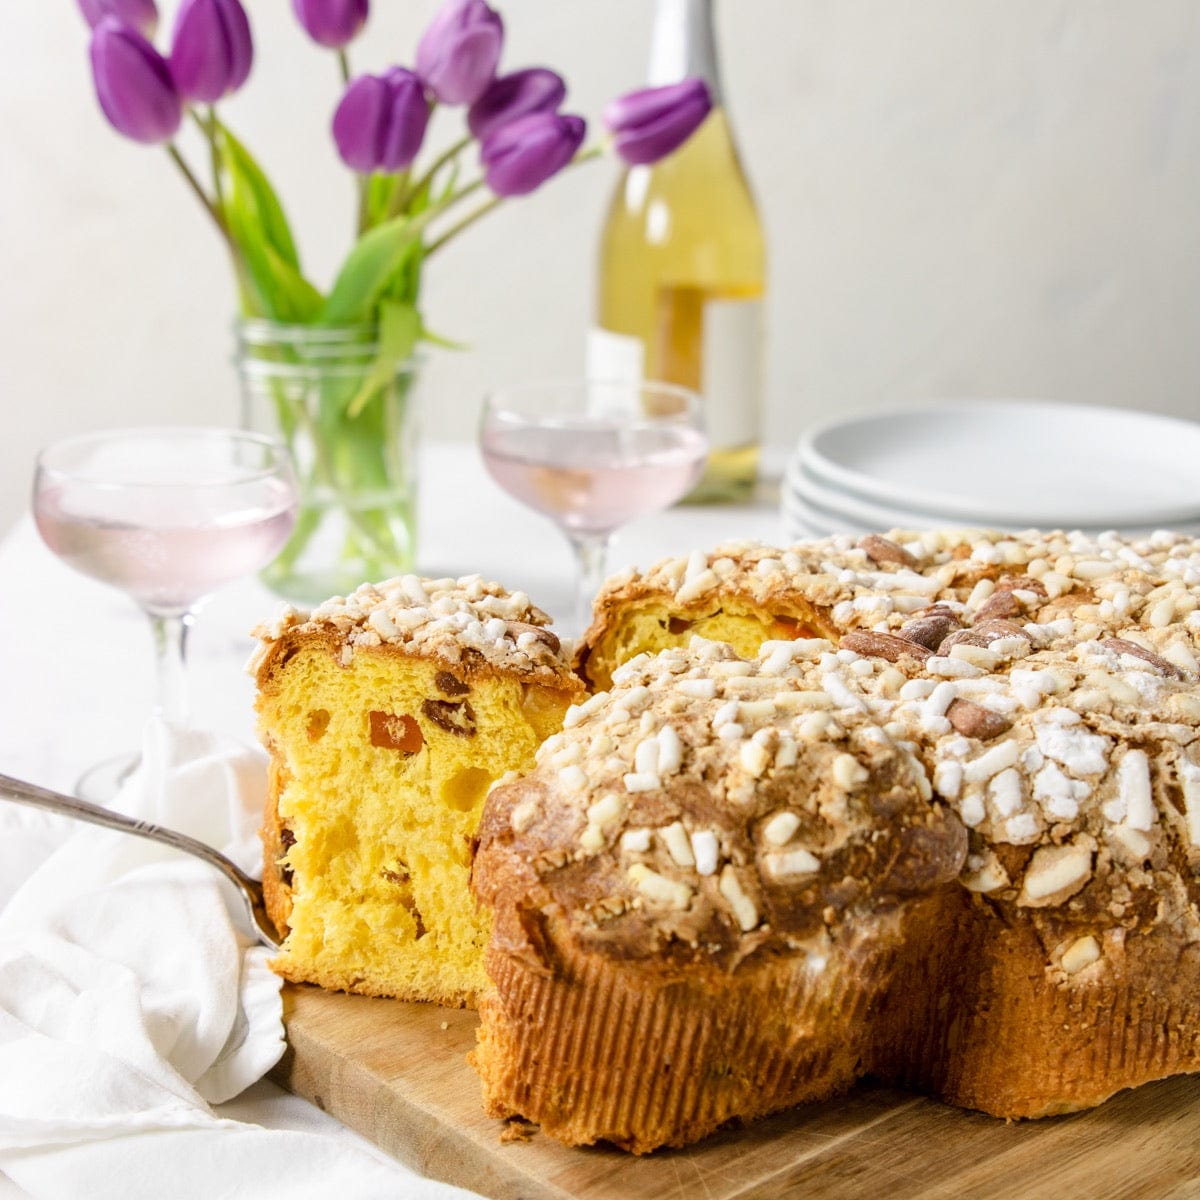 All About Italian Easter Cake: Colomba